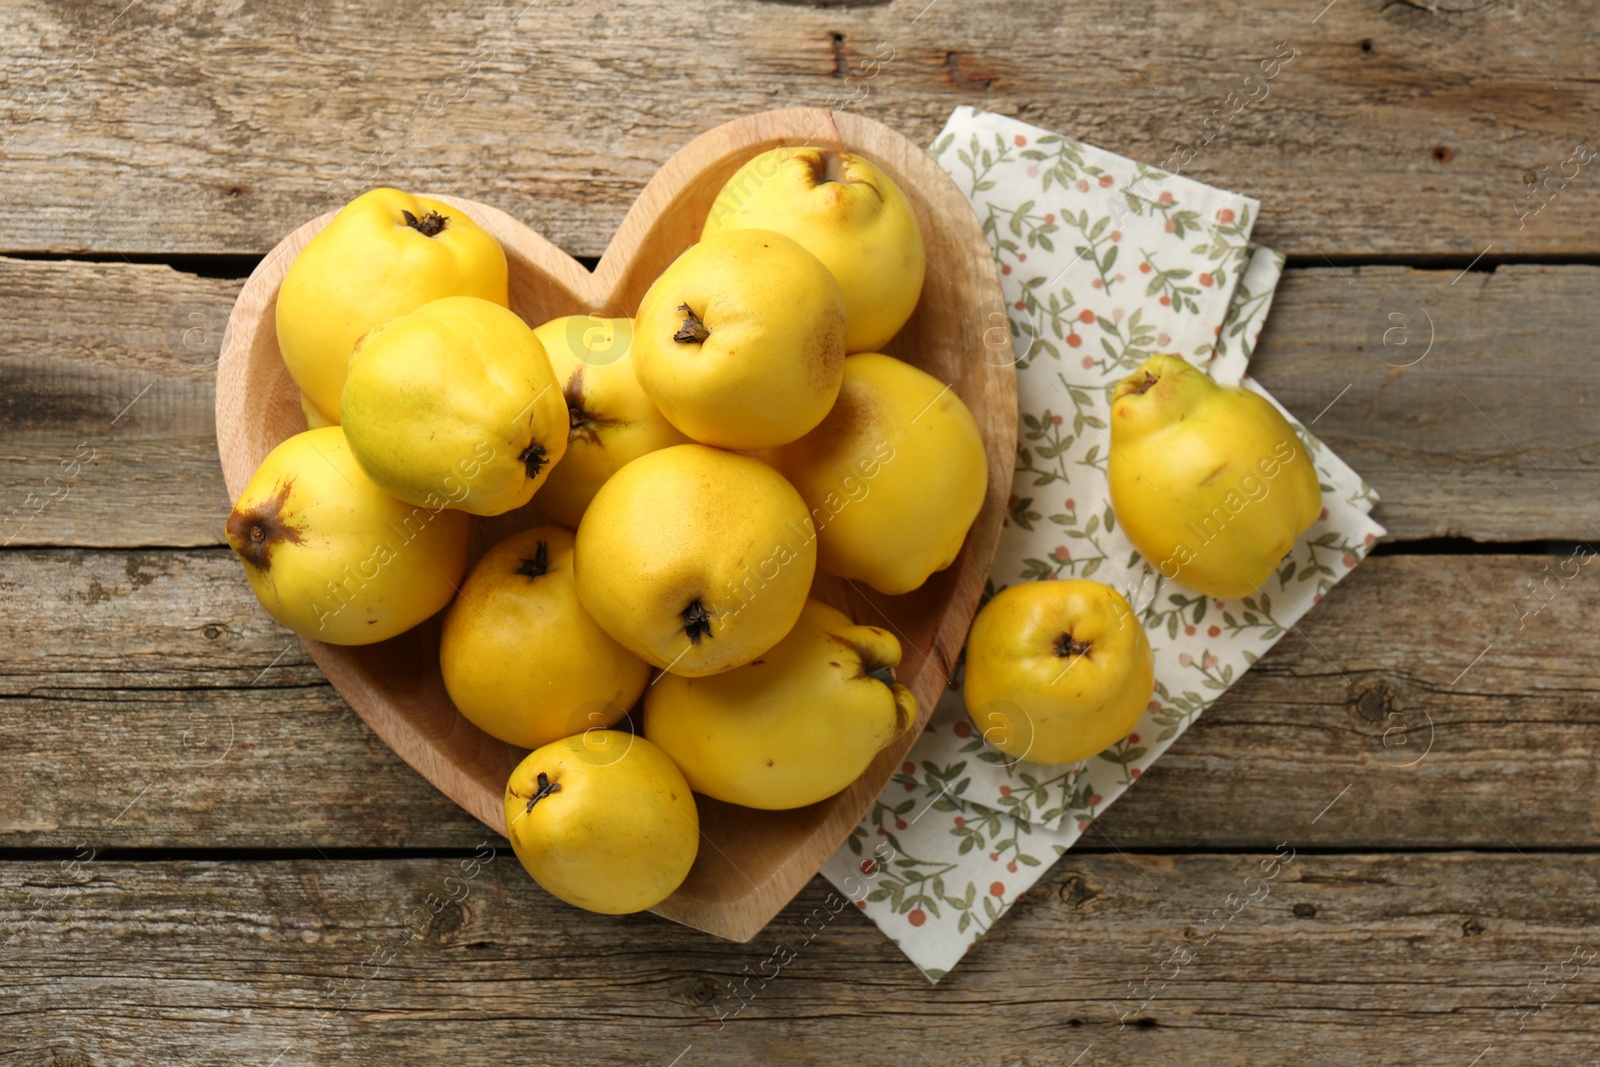 Photo of Tasty ripe quinces in heart shaped bowl on wooden table, top view